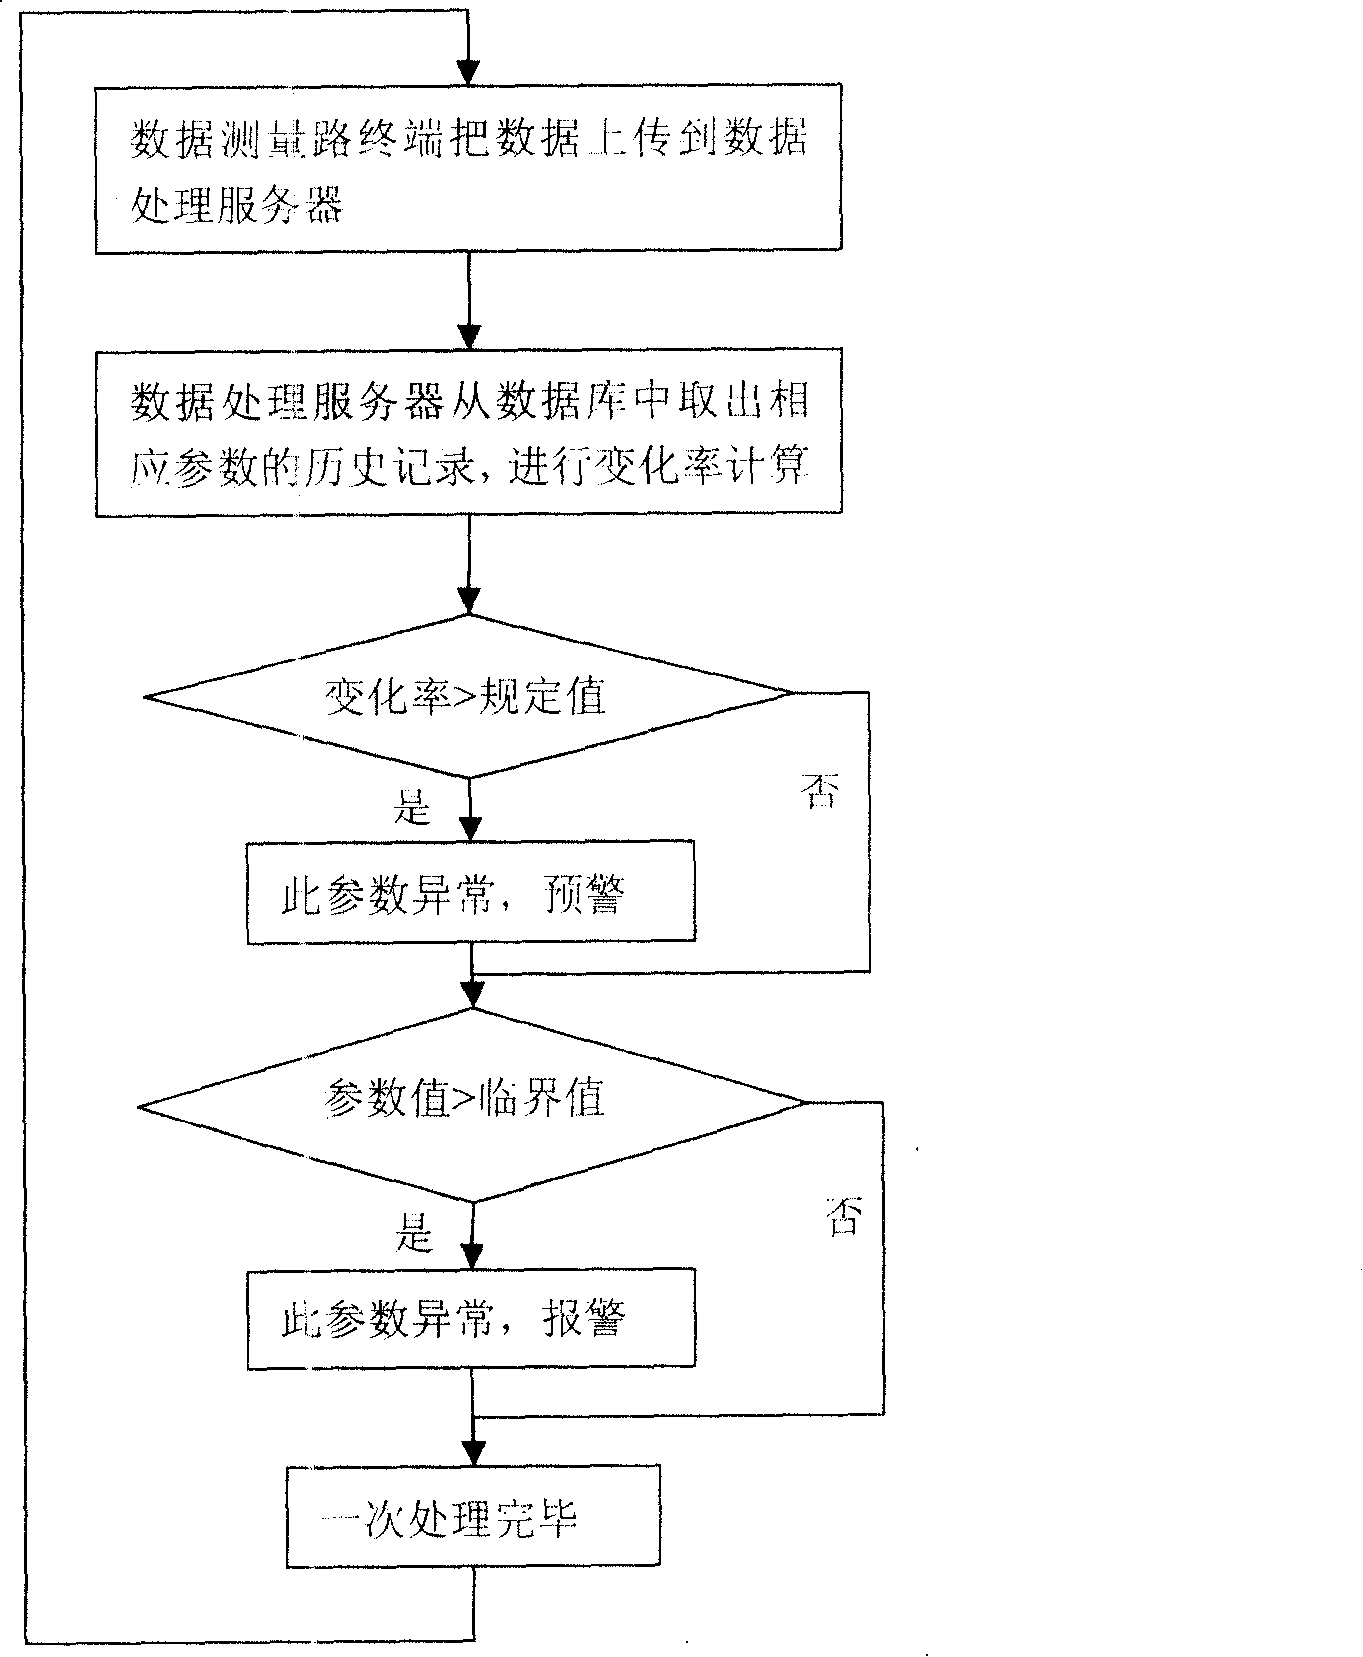 Sub-health running status recognition method of electrical device